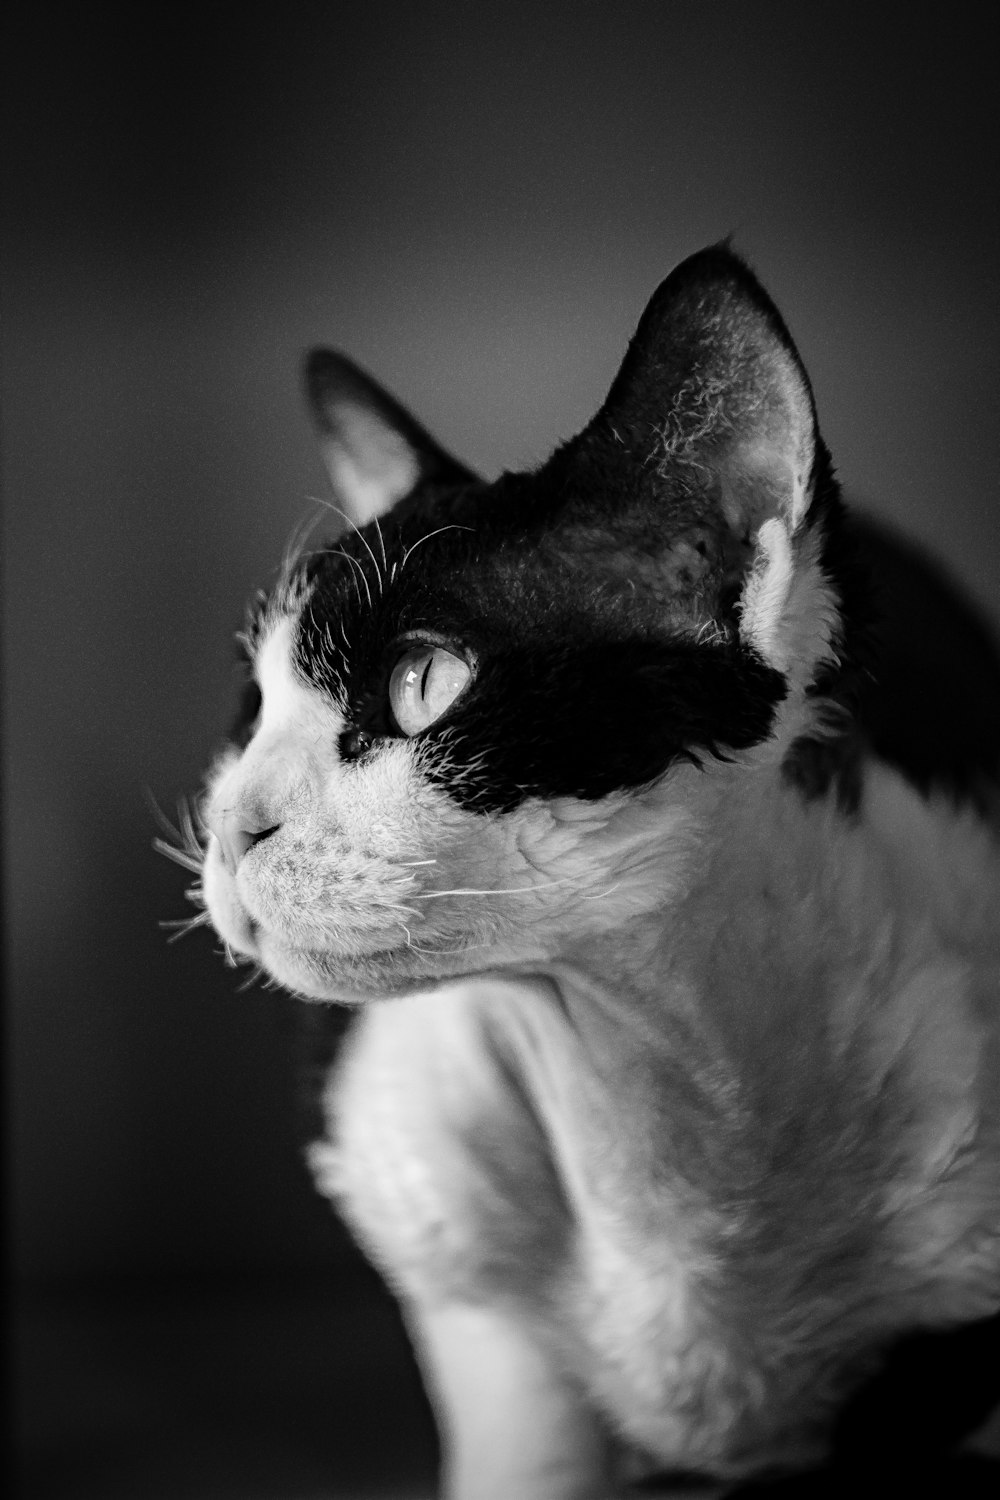 grayscale photo of cat with black eyes